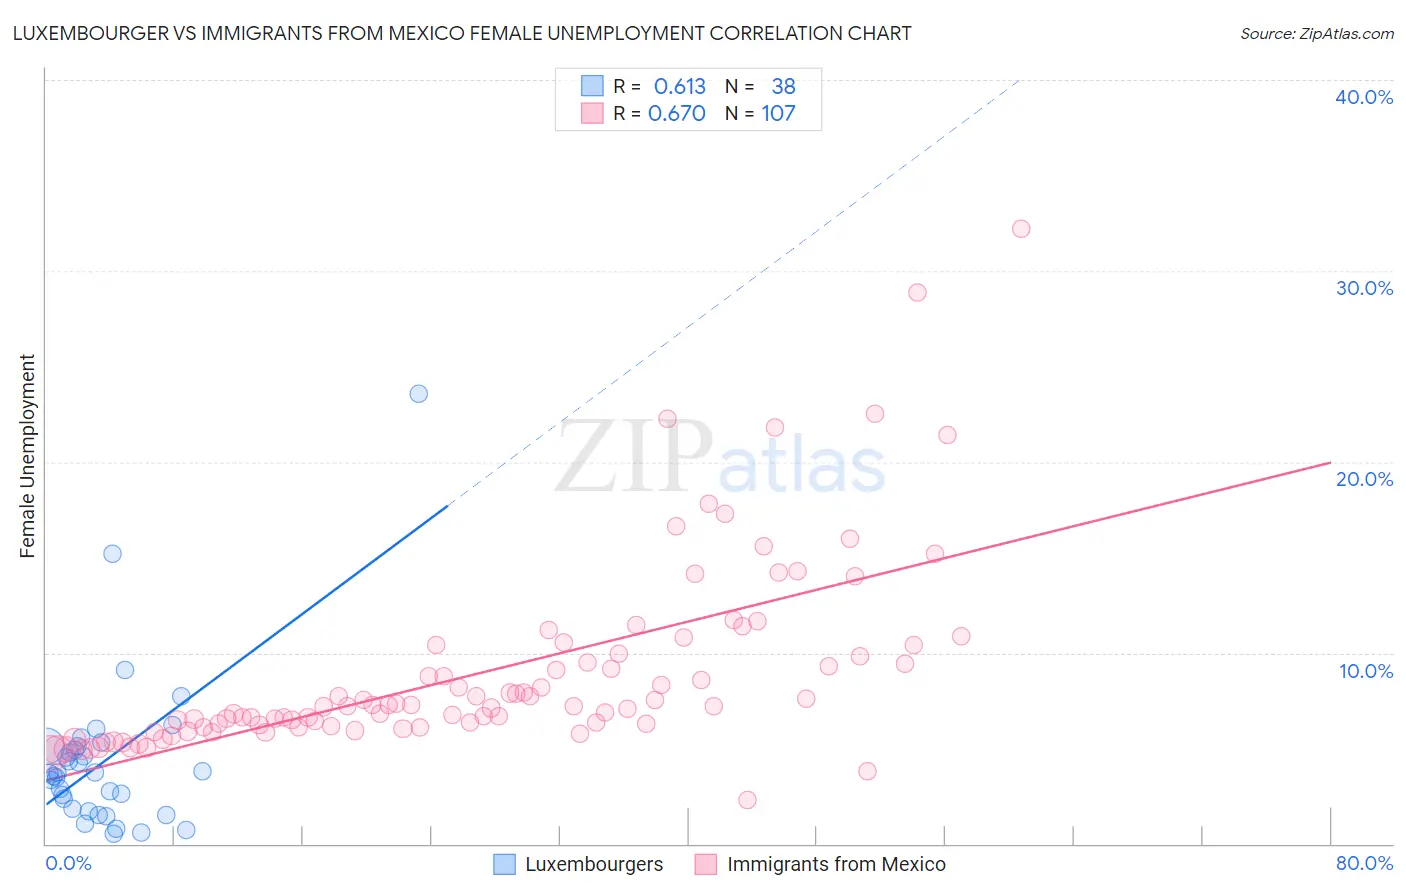 Luxembourger vs Immigrants from Mexico Female Unemployment